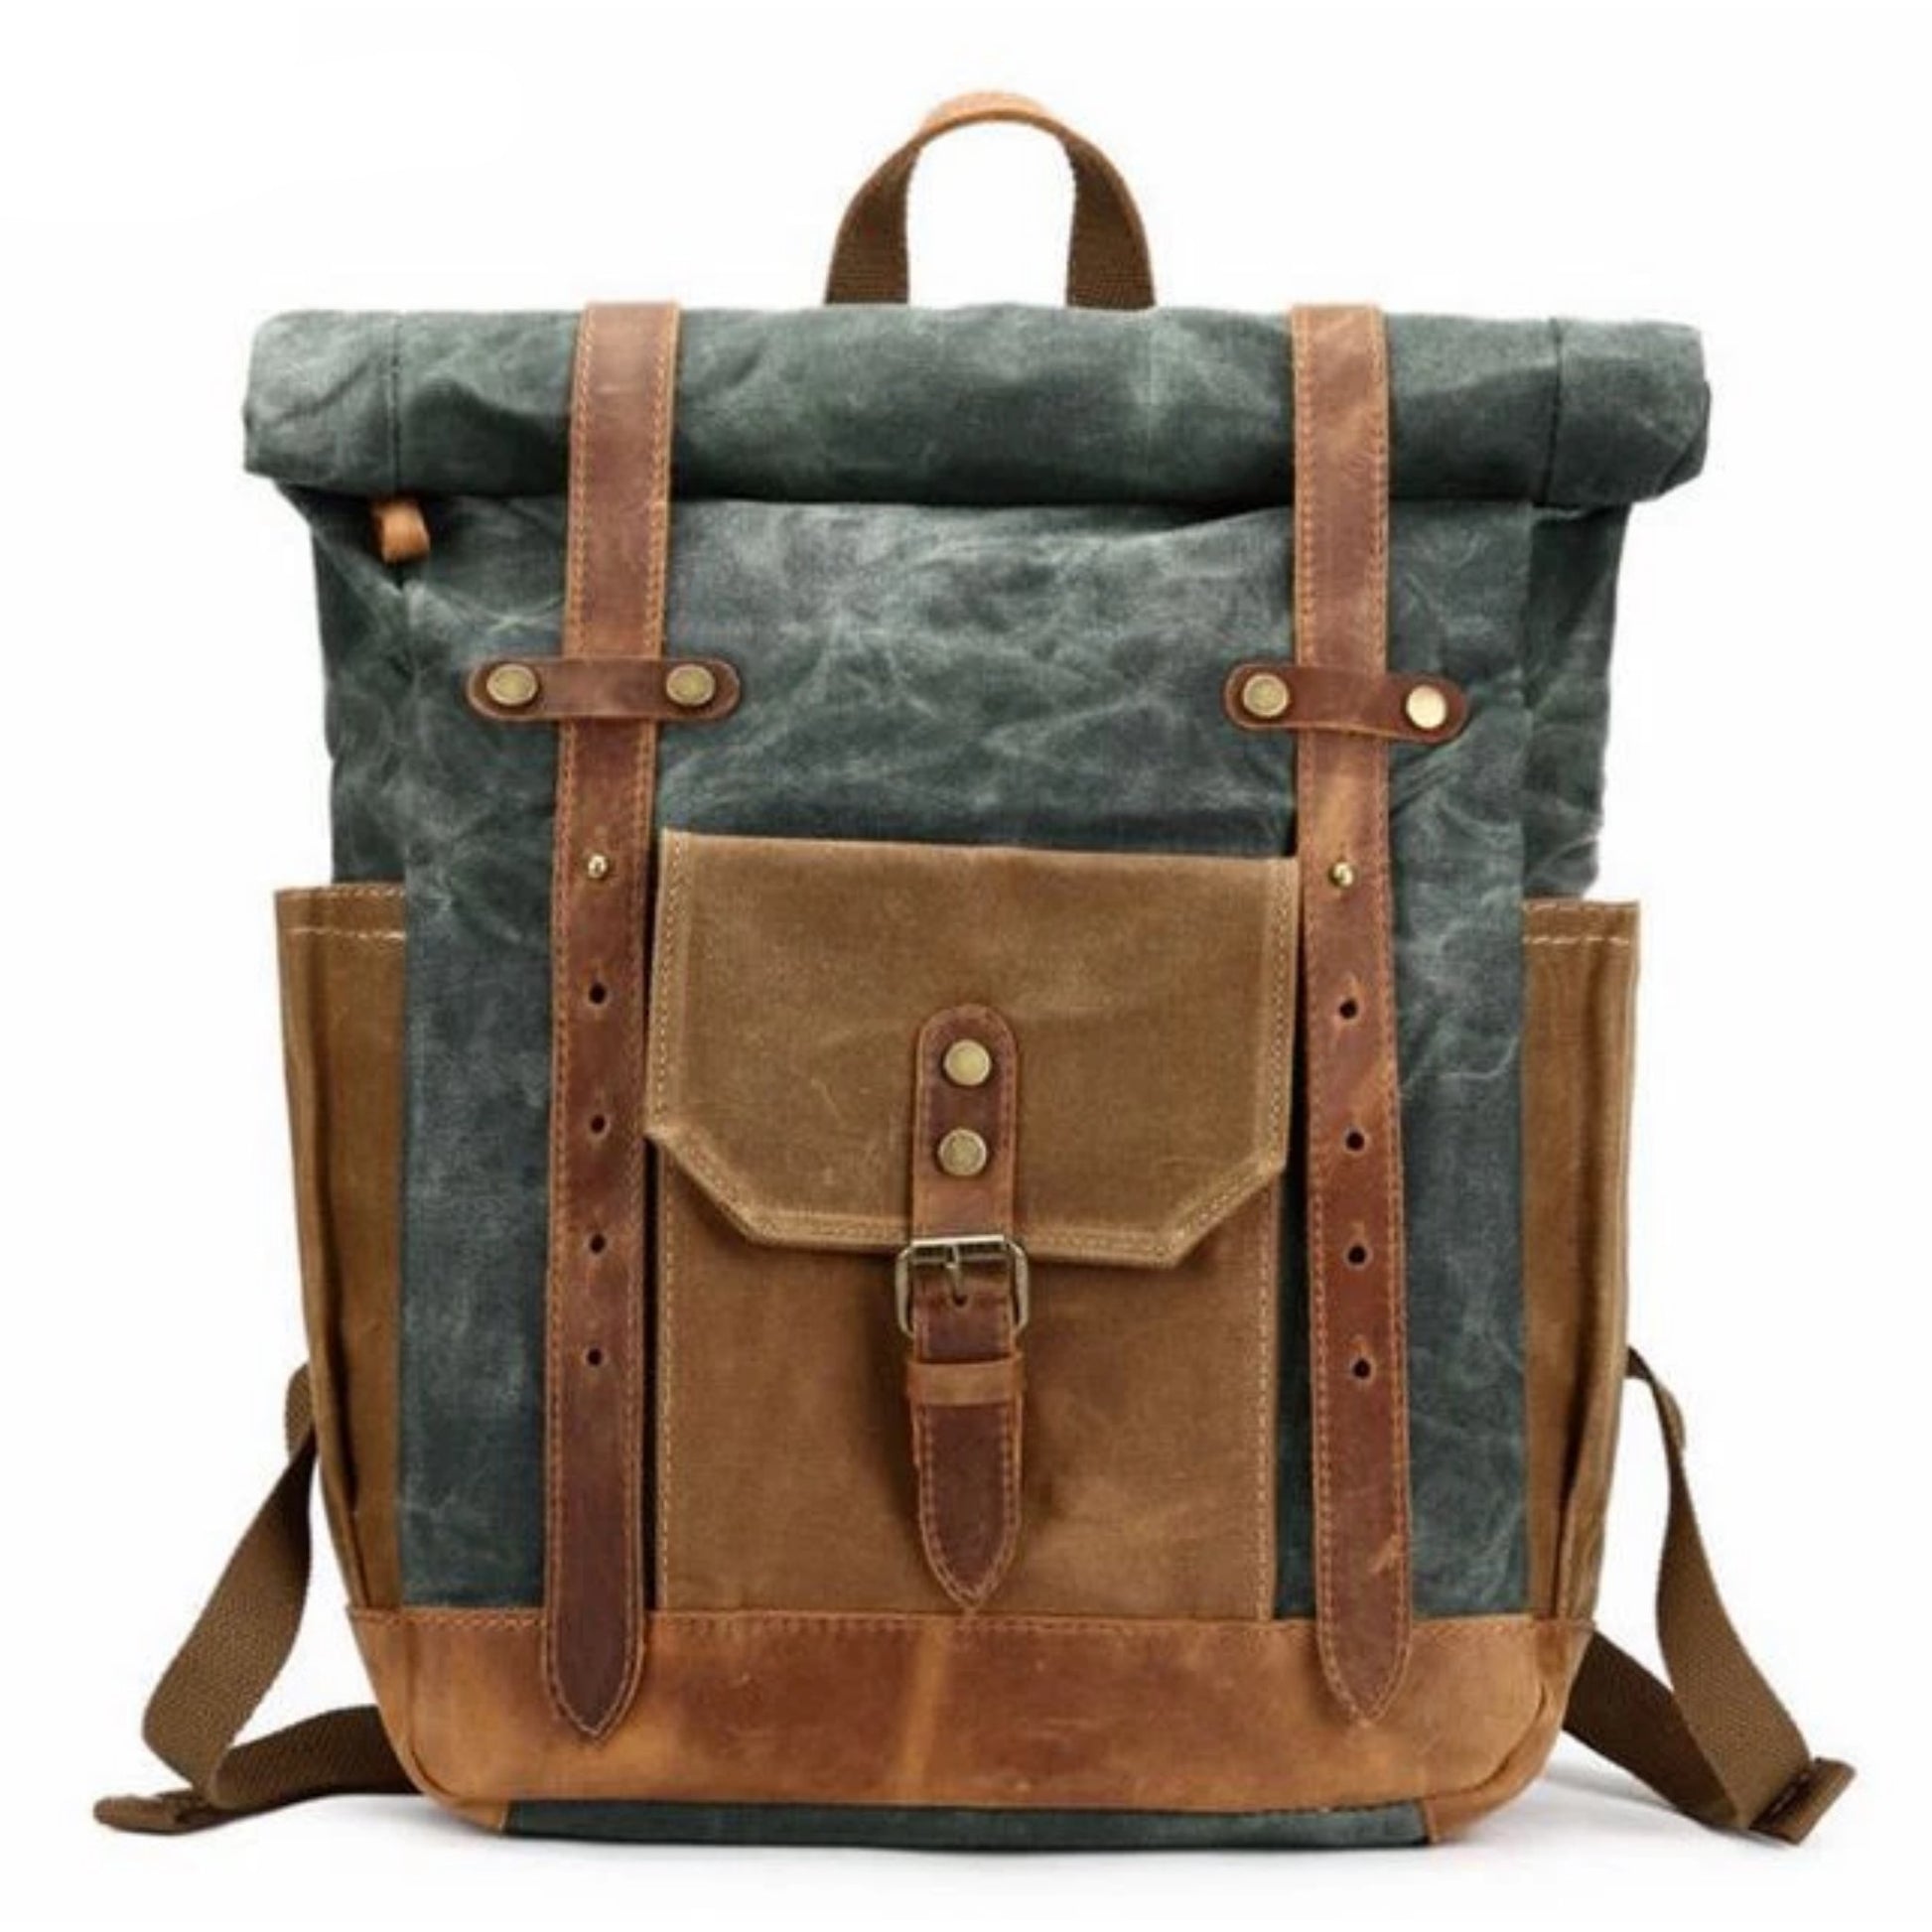 Waxed Canvas with Leather Trim Expandable Backpack - Blue Sebe Handmade Leather Bags